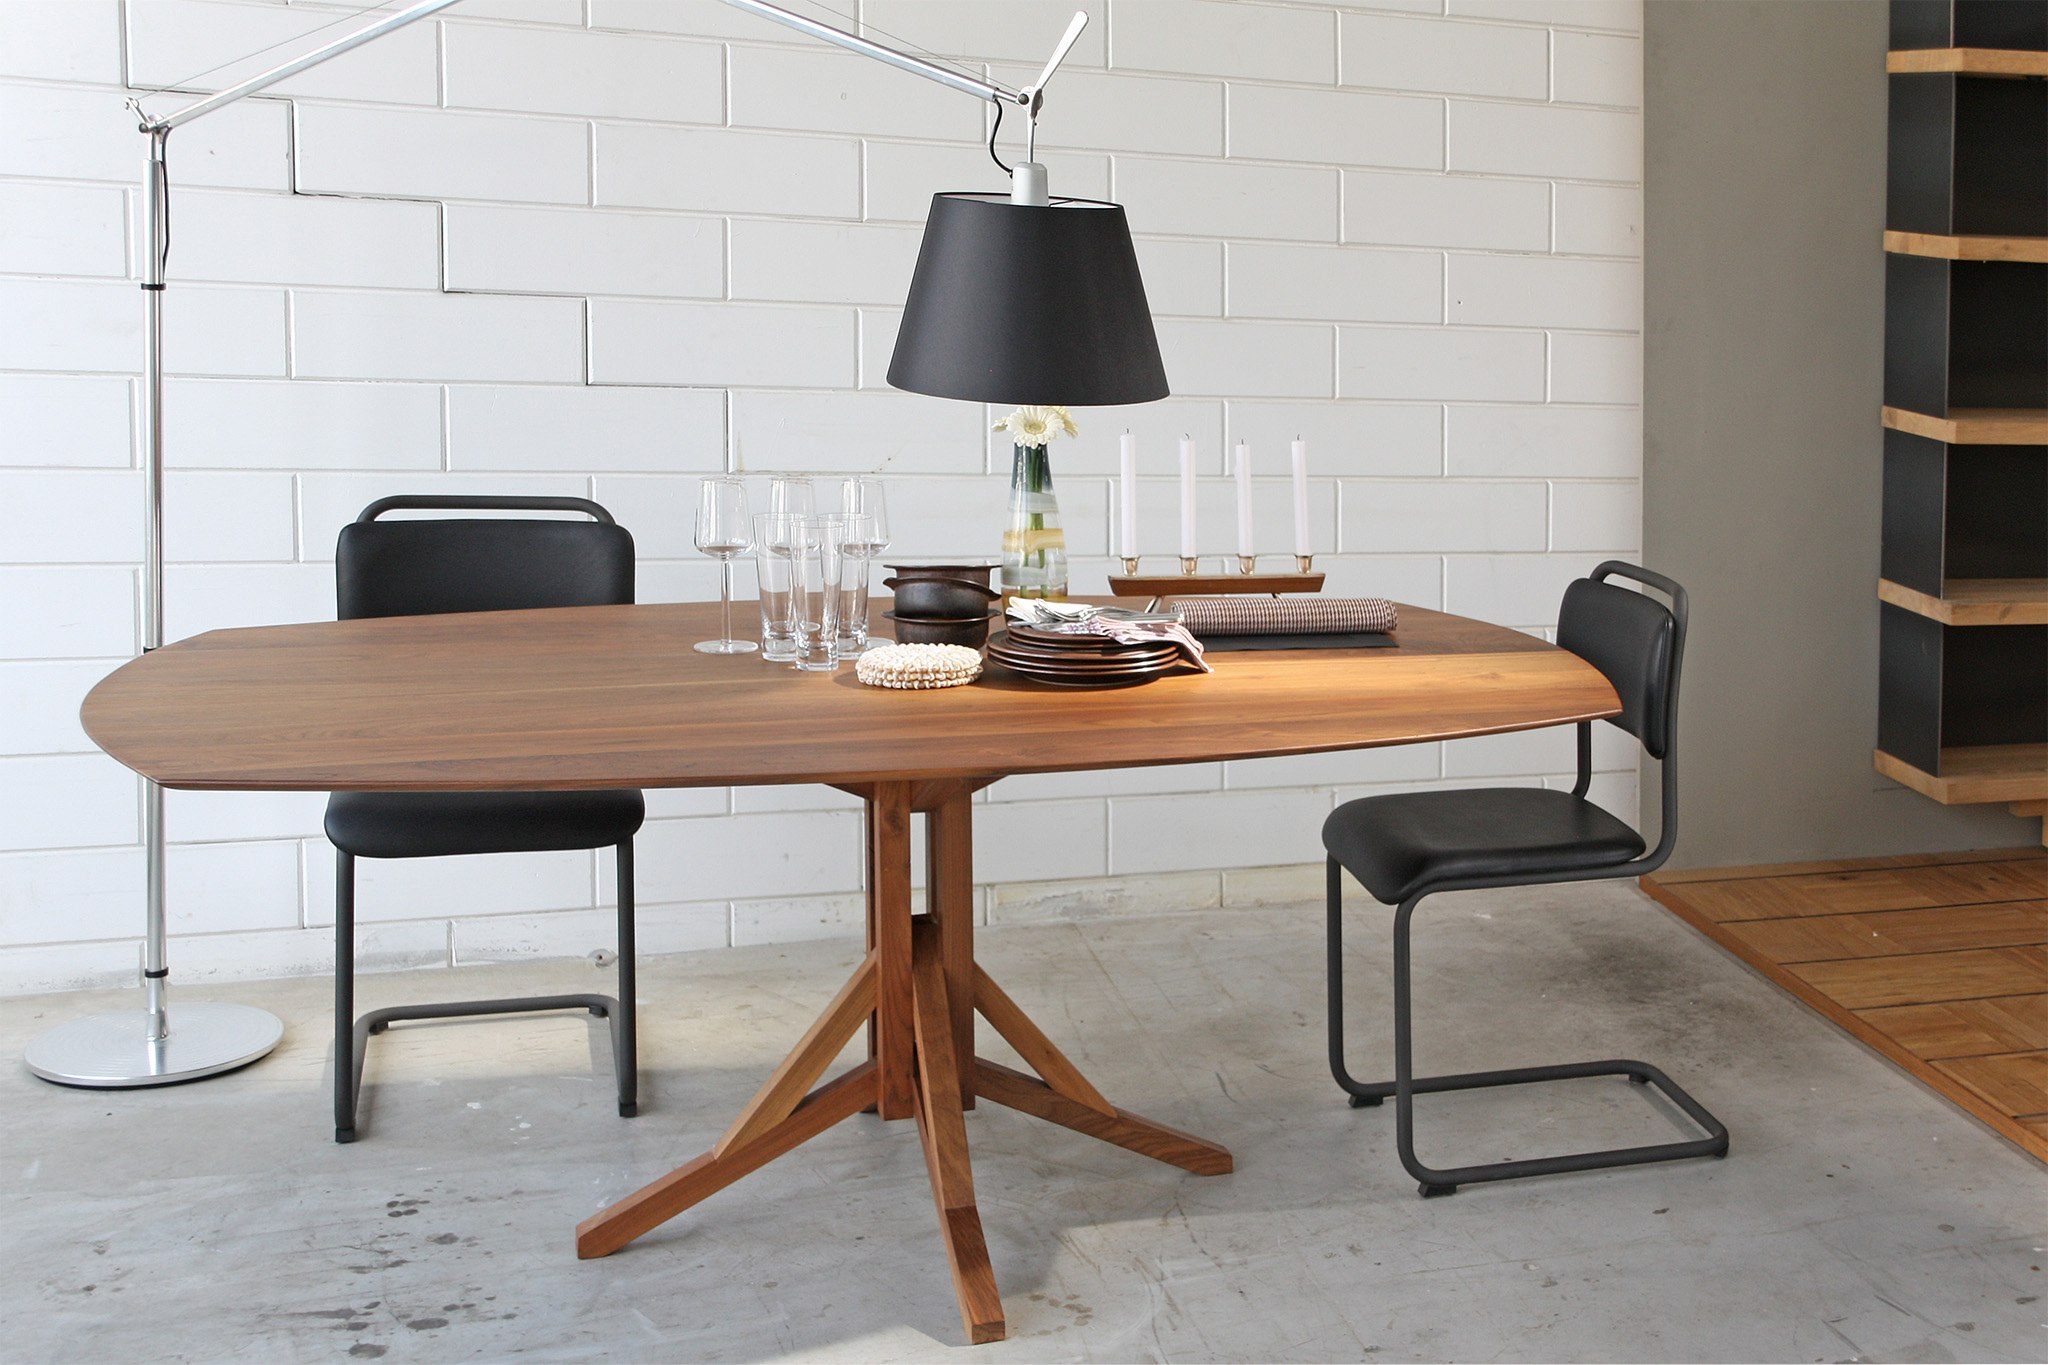  HENDRIK OVAL - dining table / design from 2013